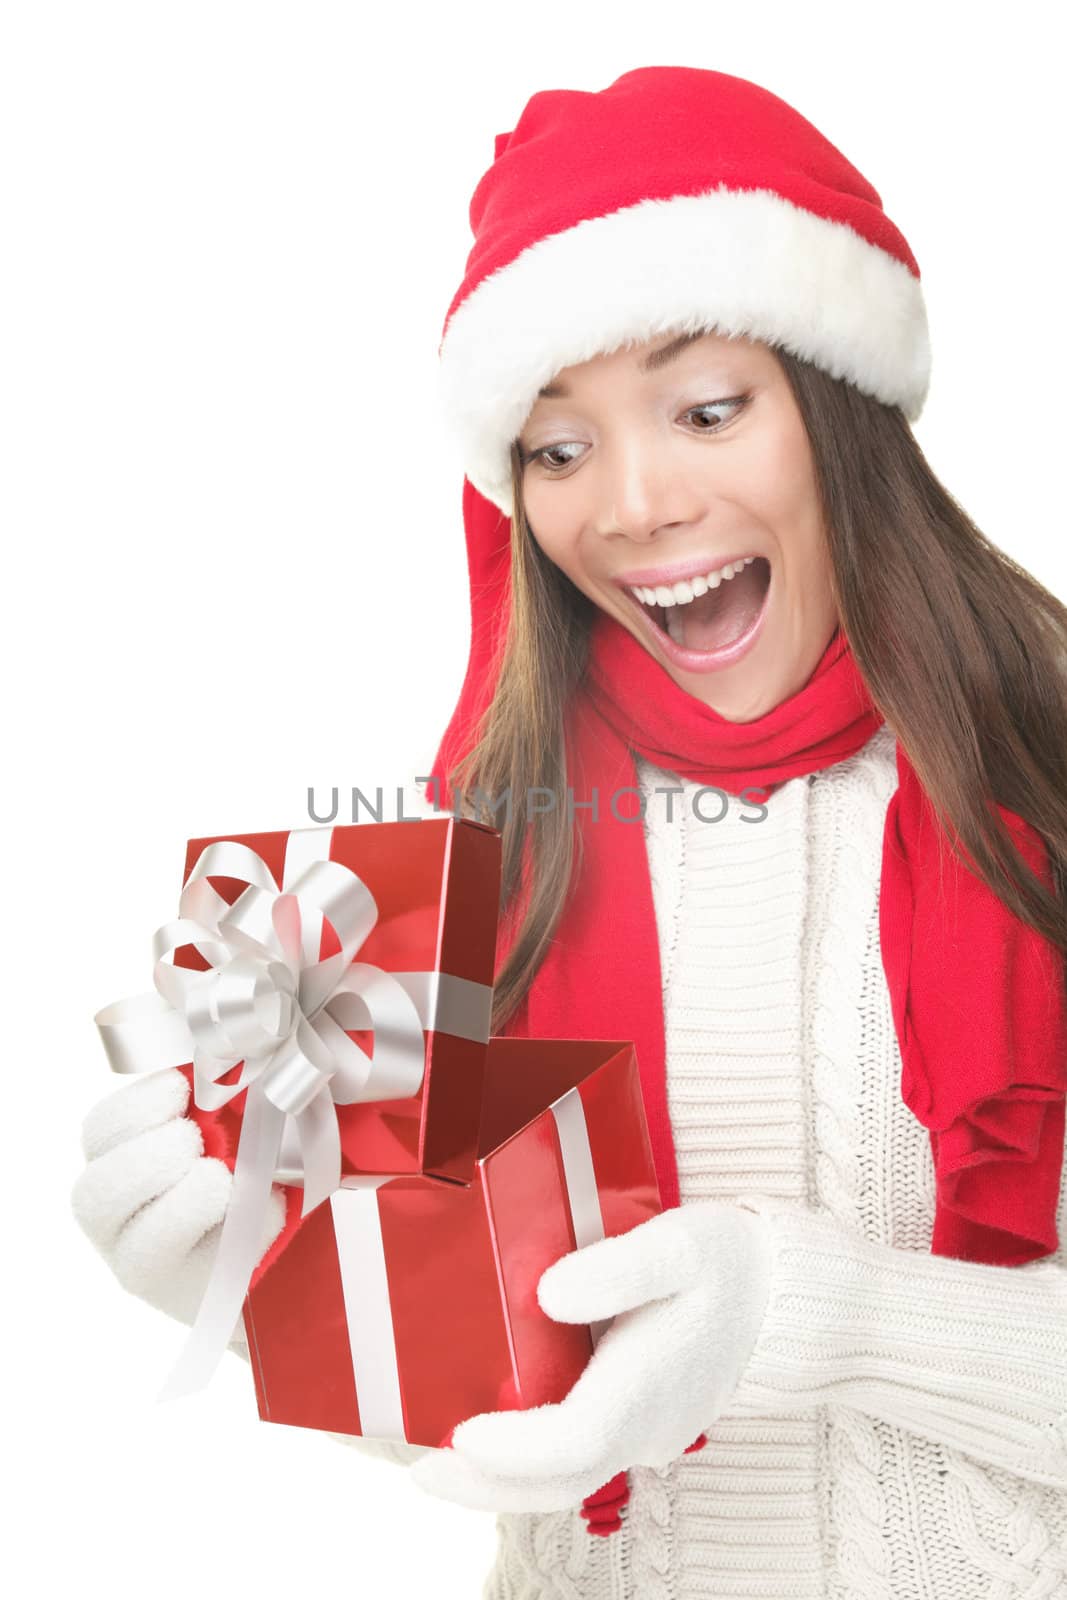 Christmas Gift - woman opening gift surprised and happy, Young beautiful smiling woman in Santa hat. Funny cute photo of Asian / Caucasian woman isolated on white background